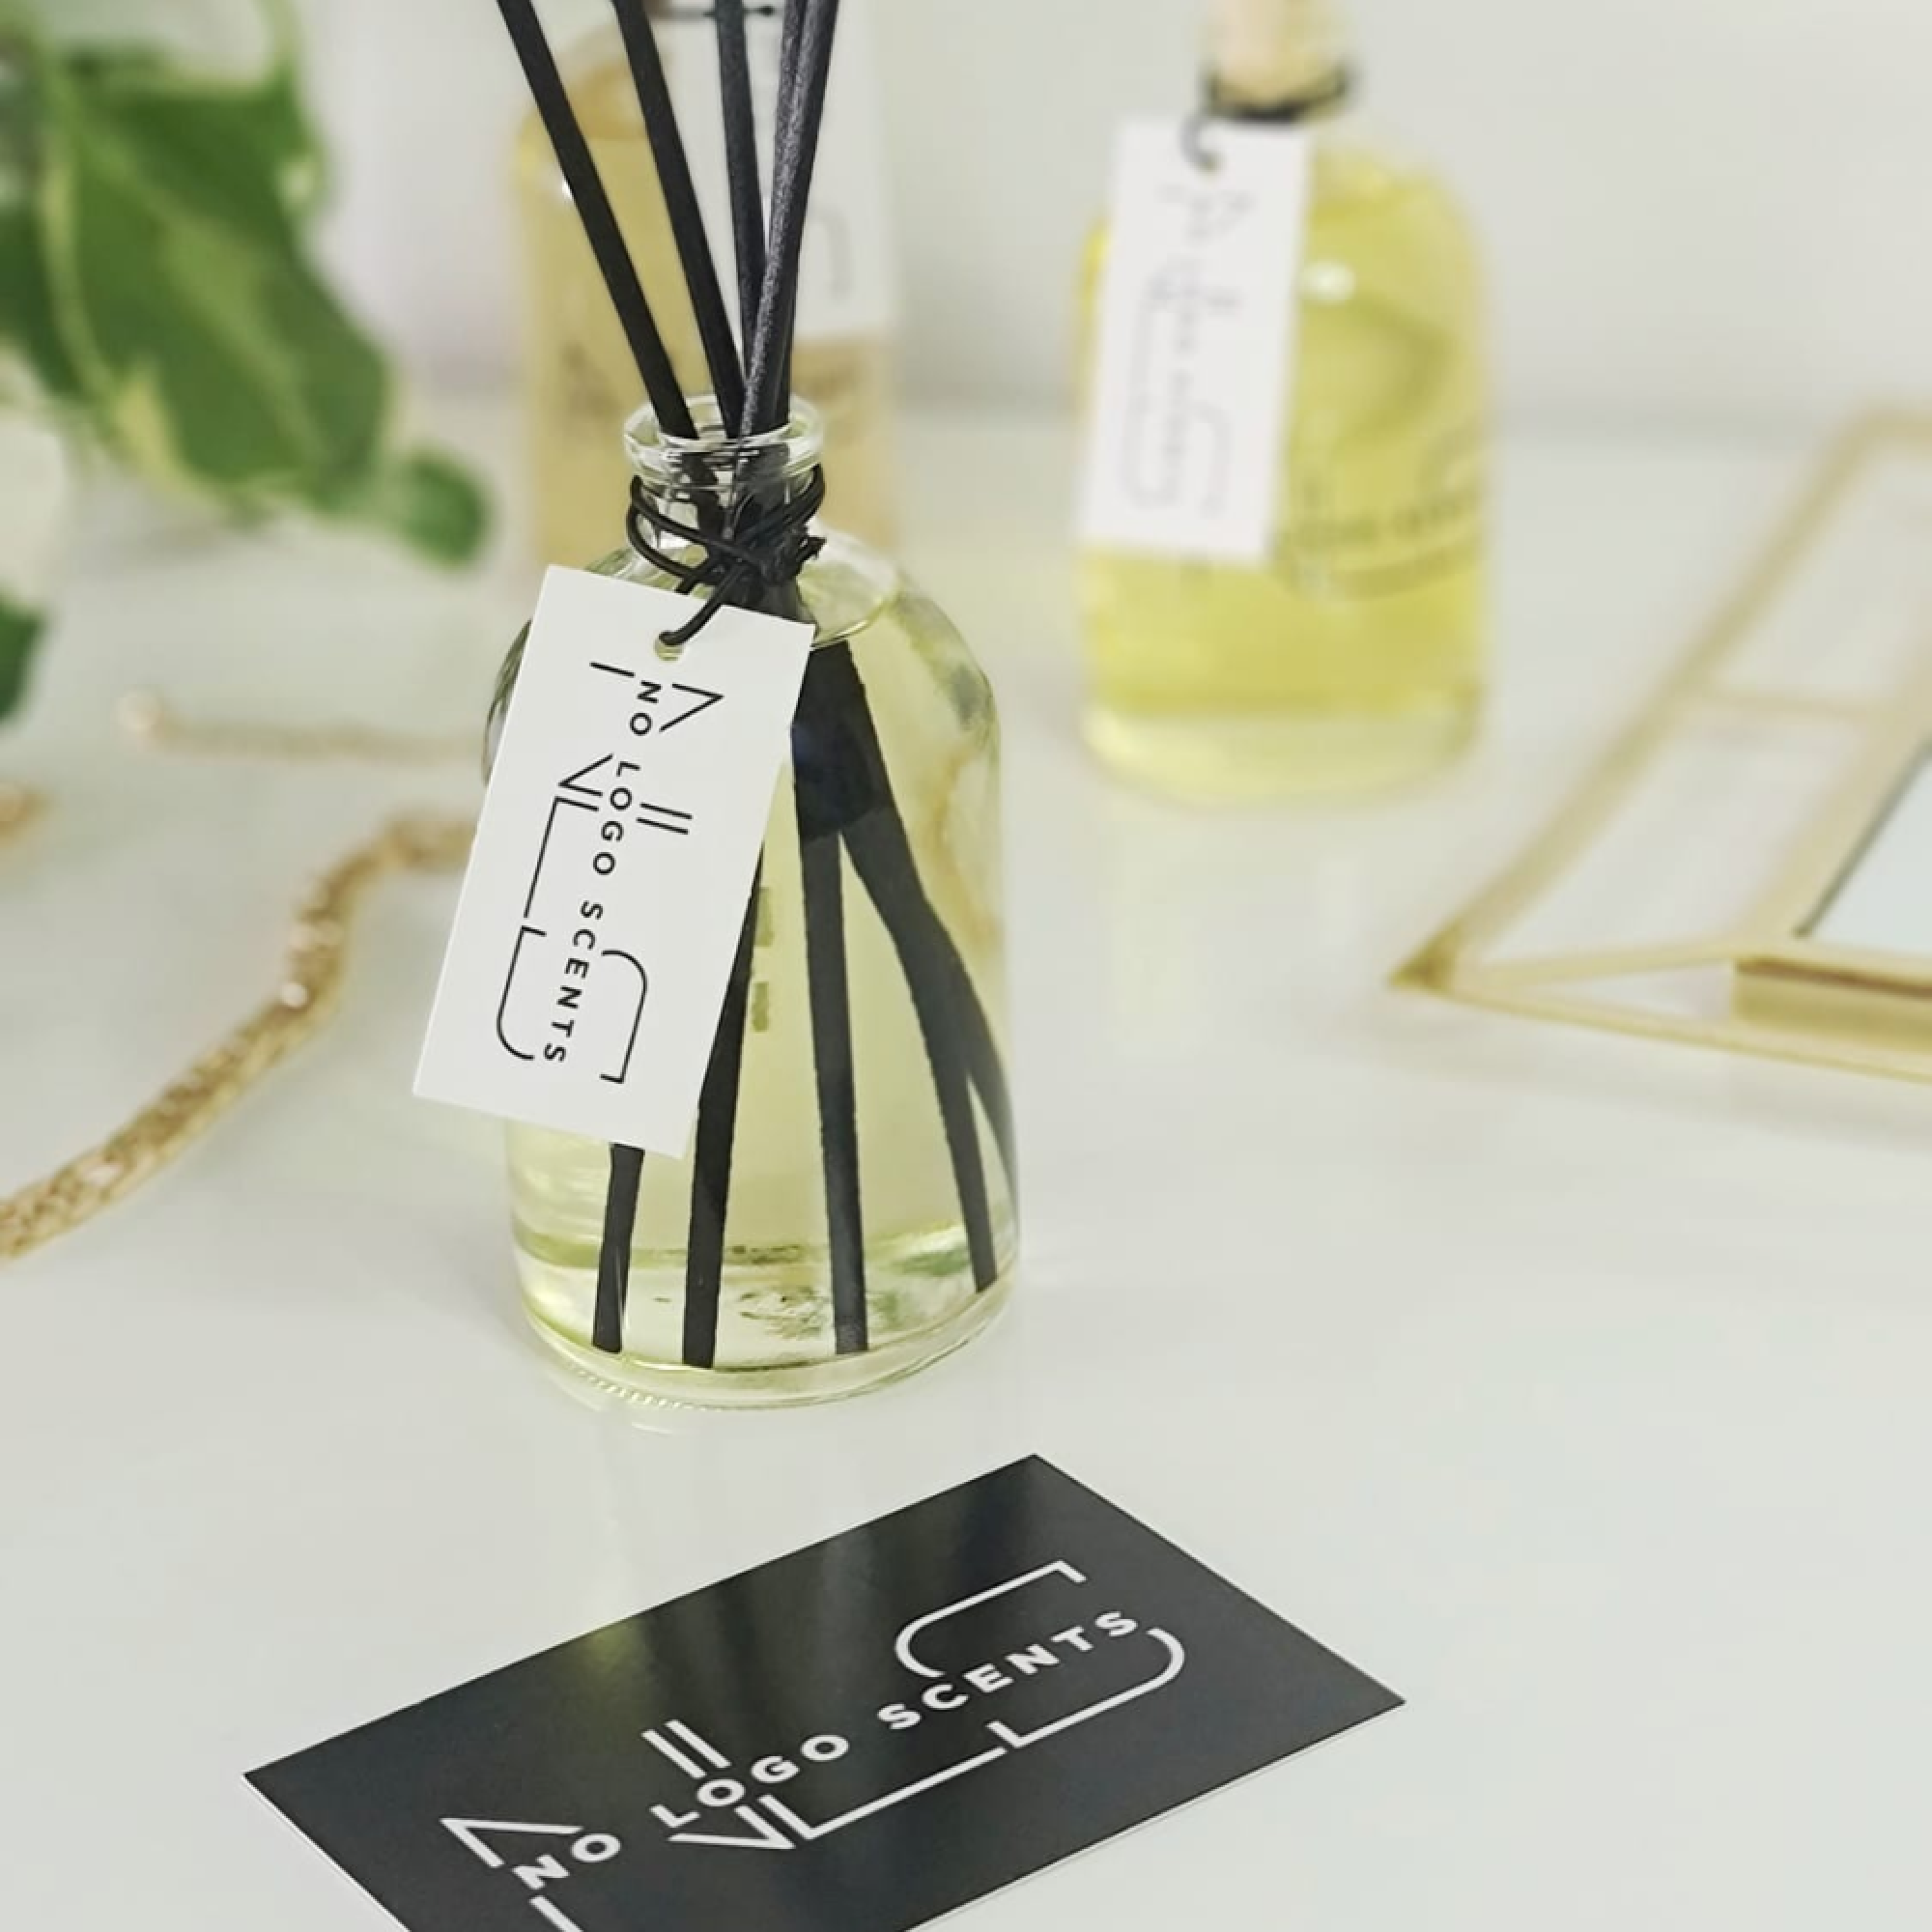 Highly Scented Reed Diffuser from category HOME & CAR - 3